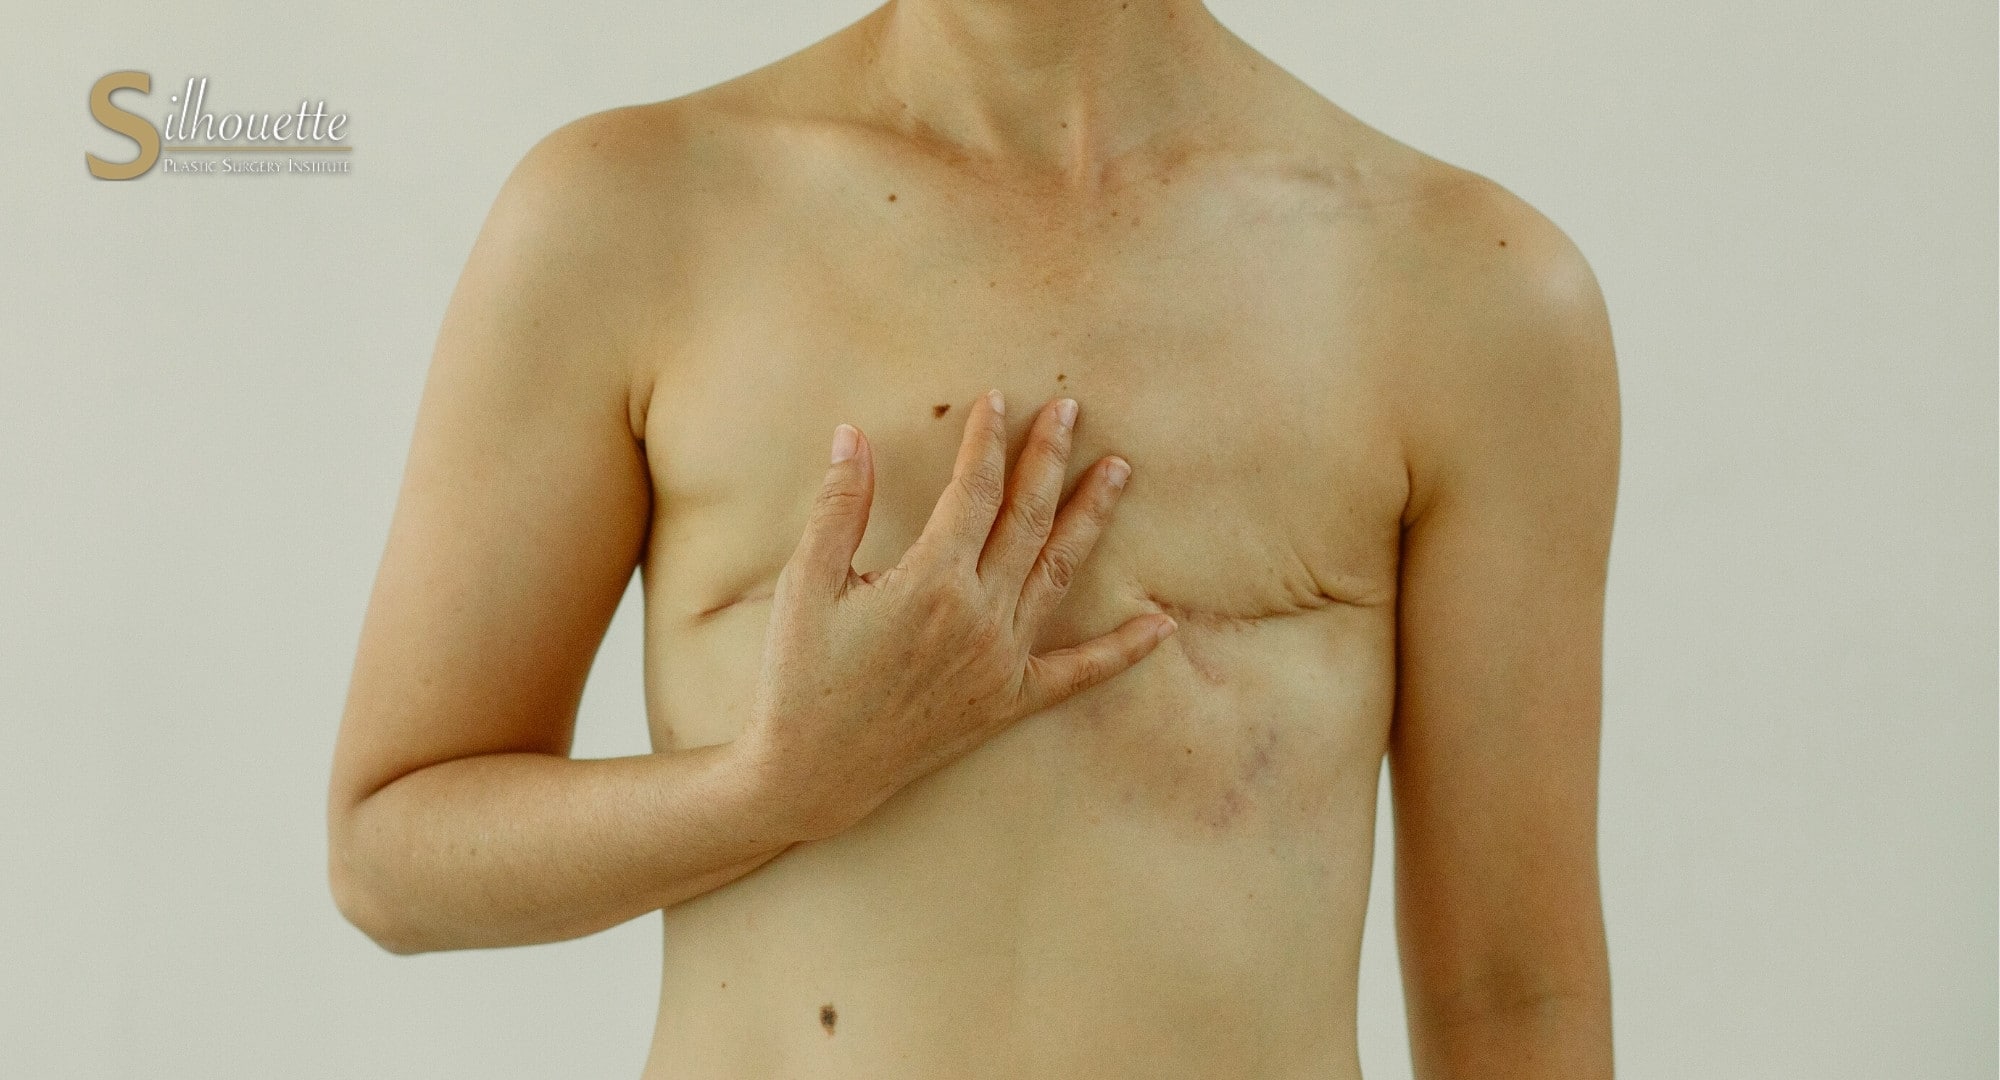 The mastectomy patch: A bra for women who have undergone breast